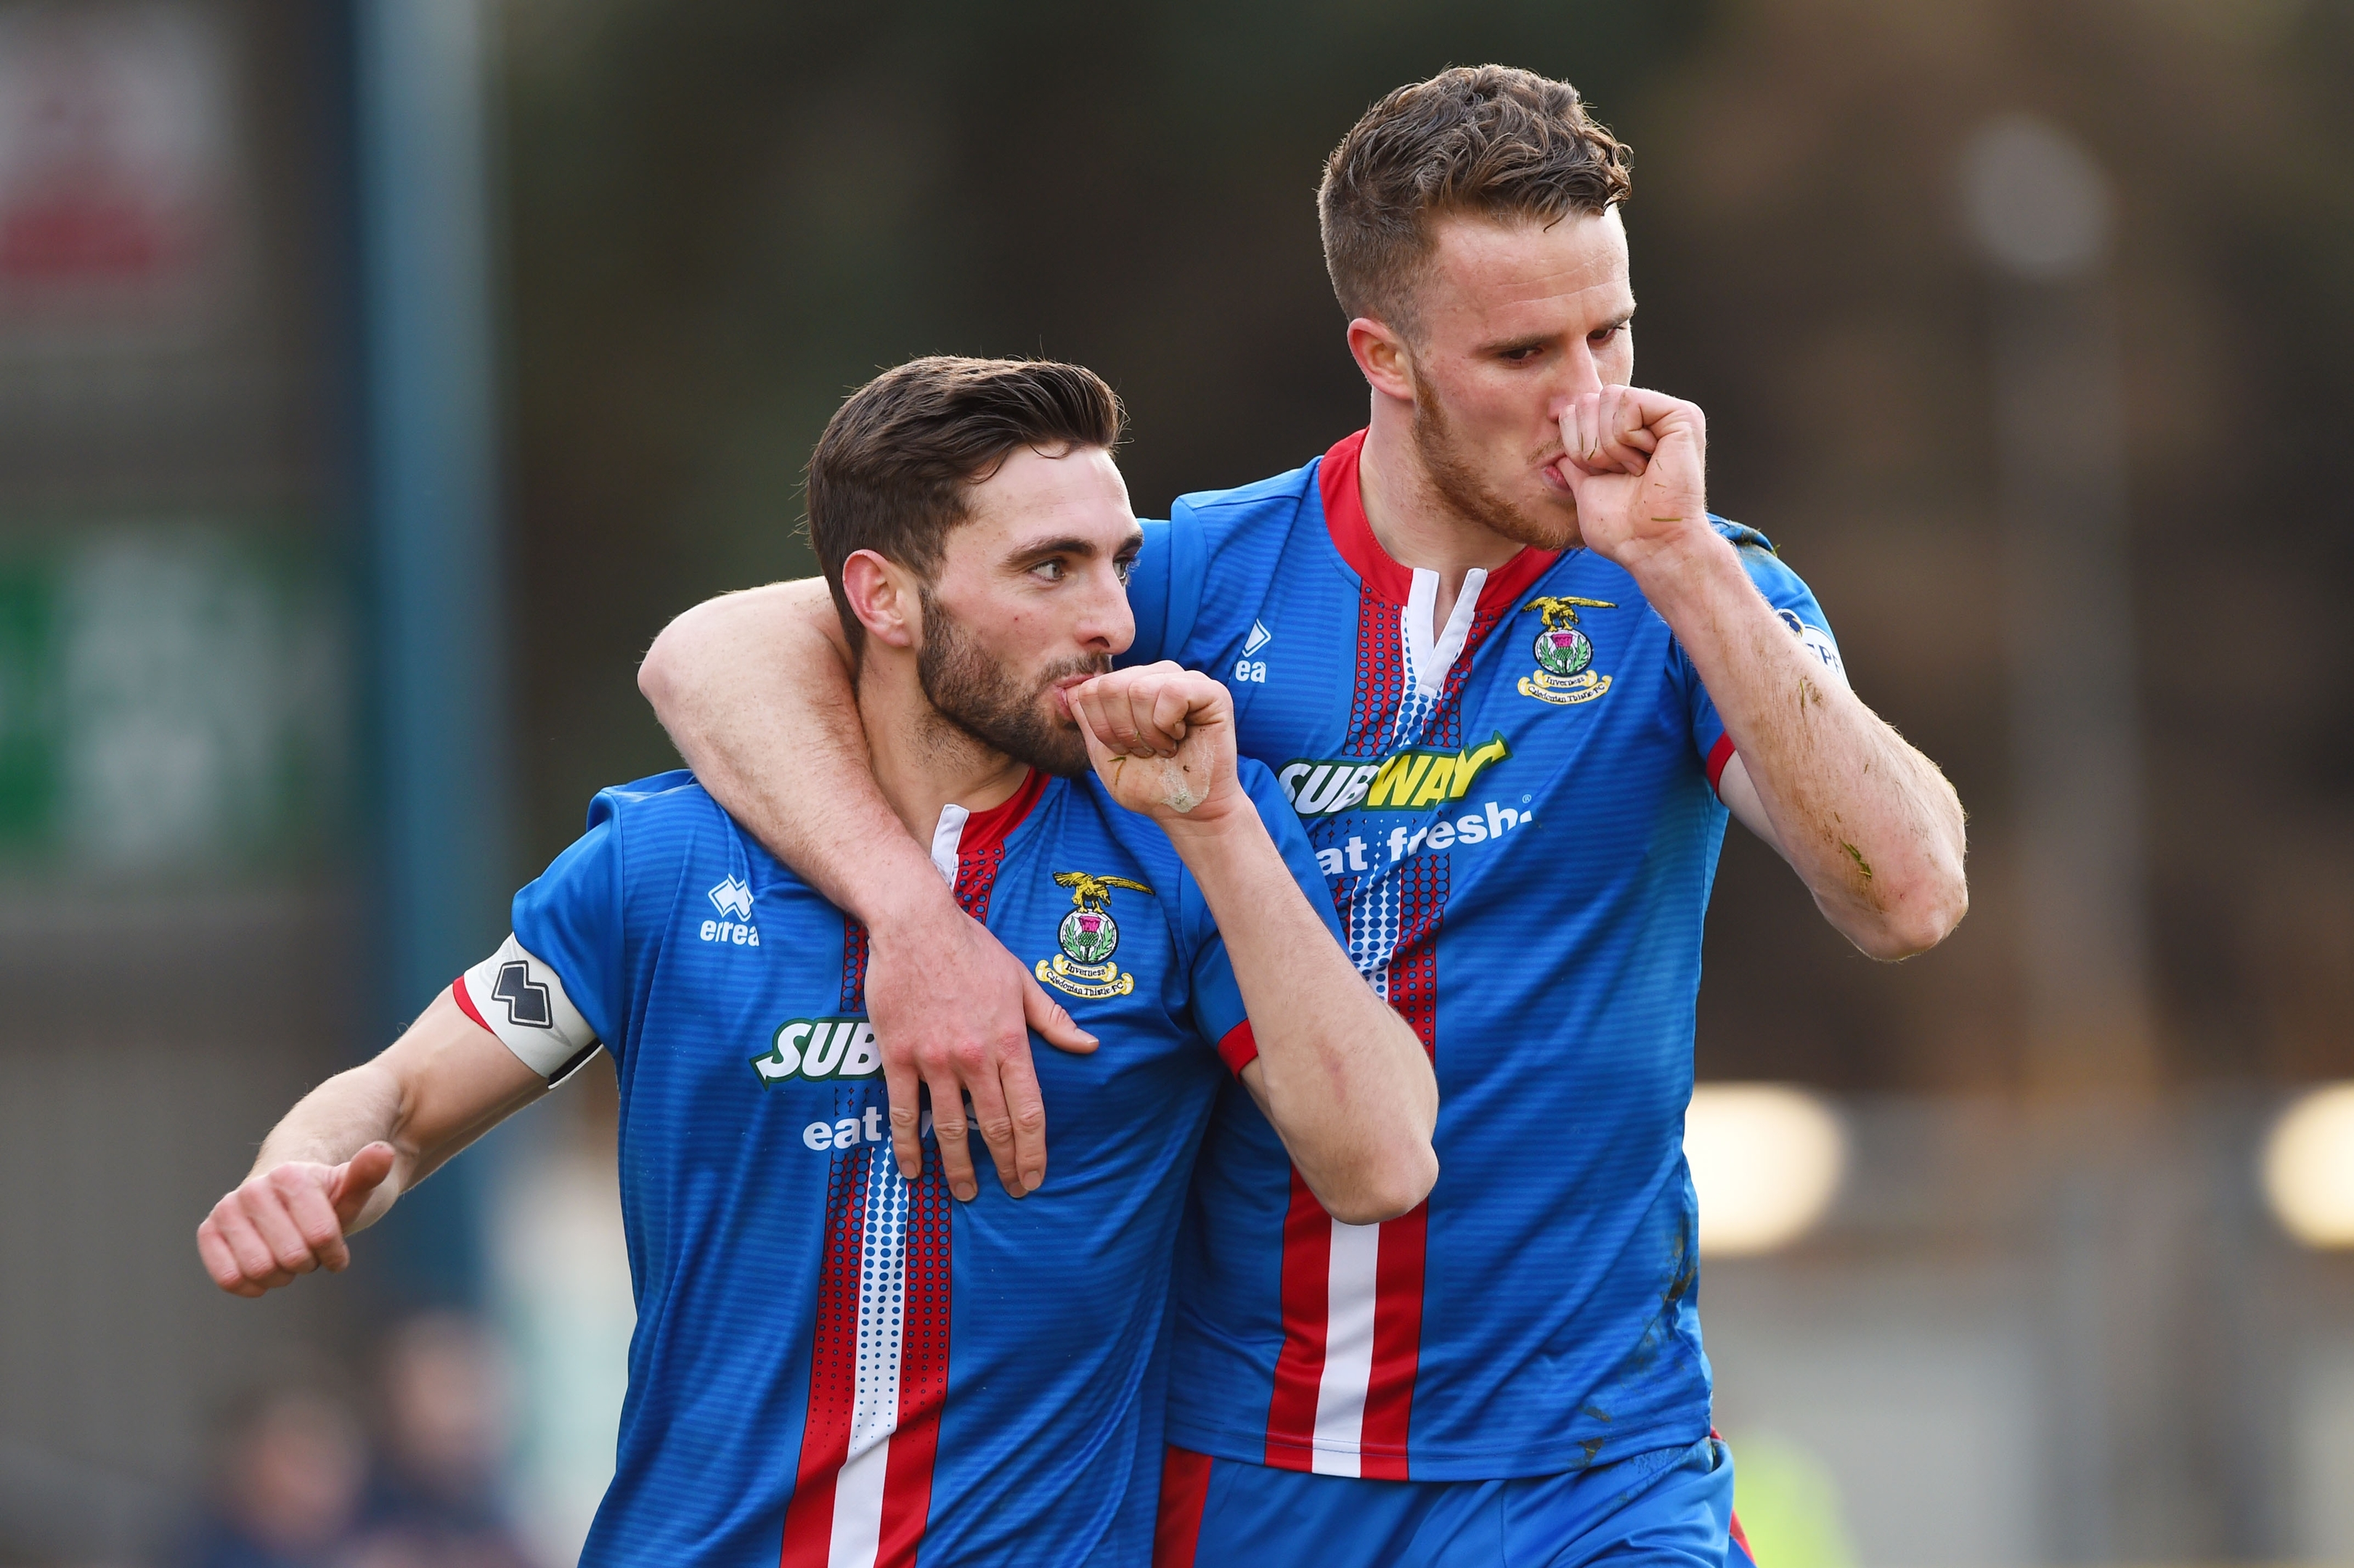 Caley Thistle will undoubtedly miss key duo Graeme Shinnie and Marley Watkins